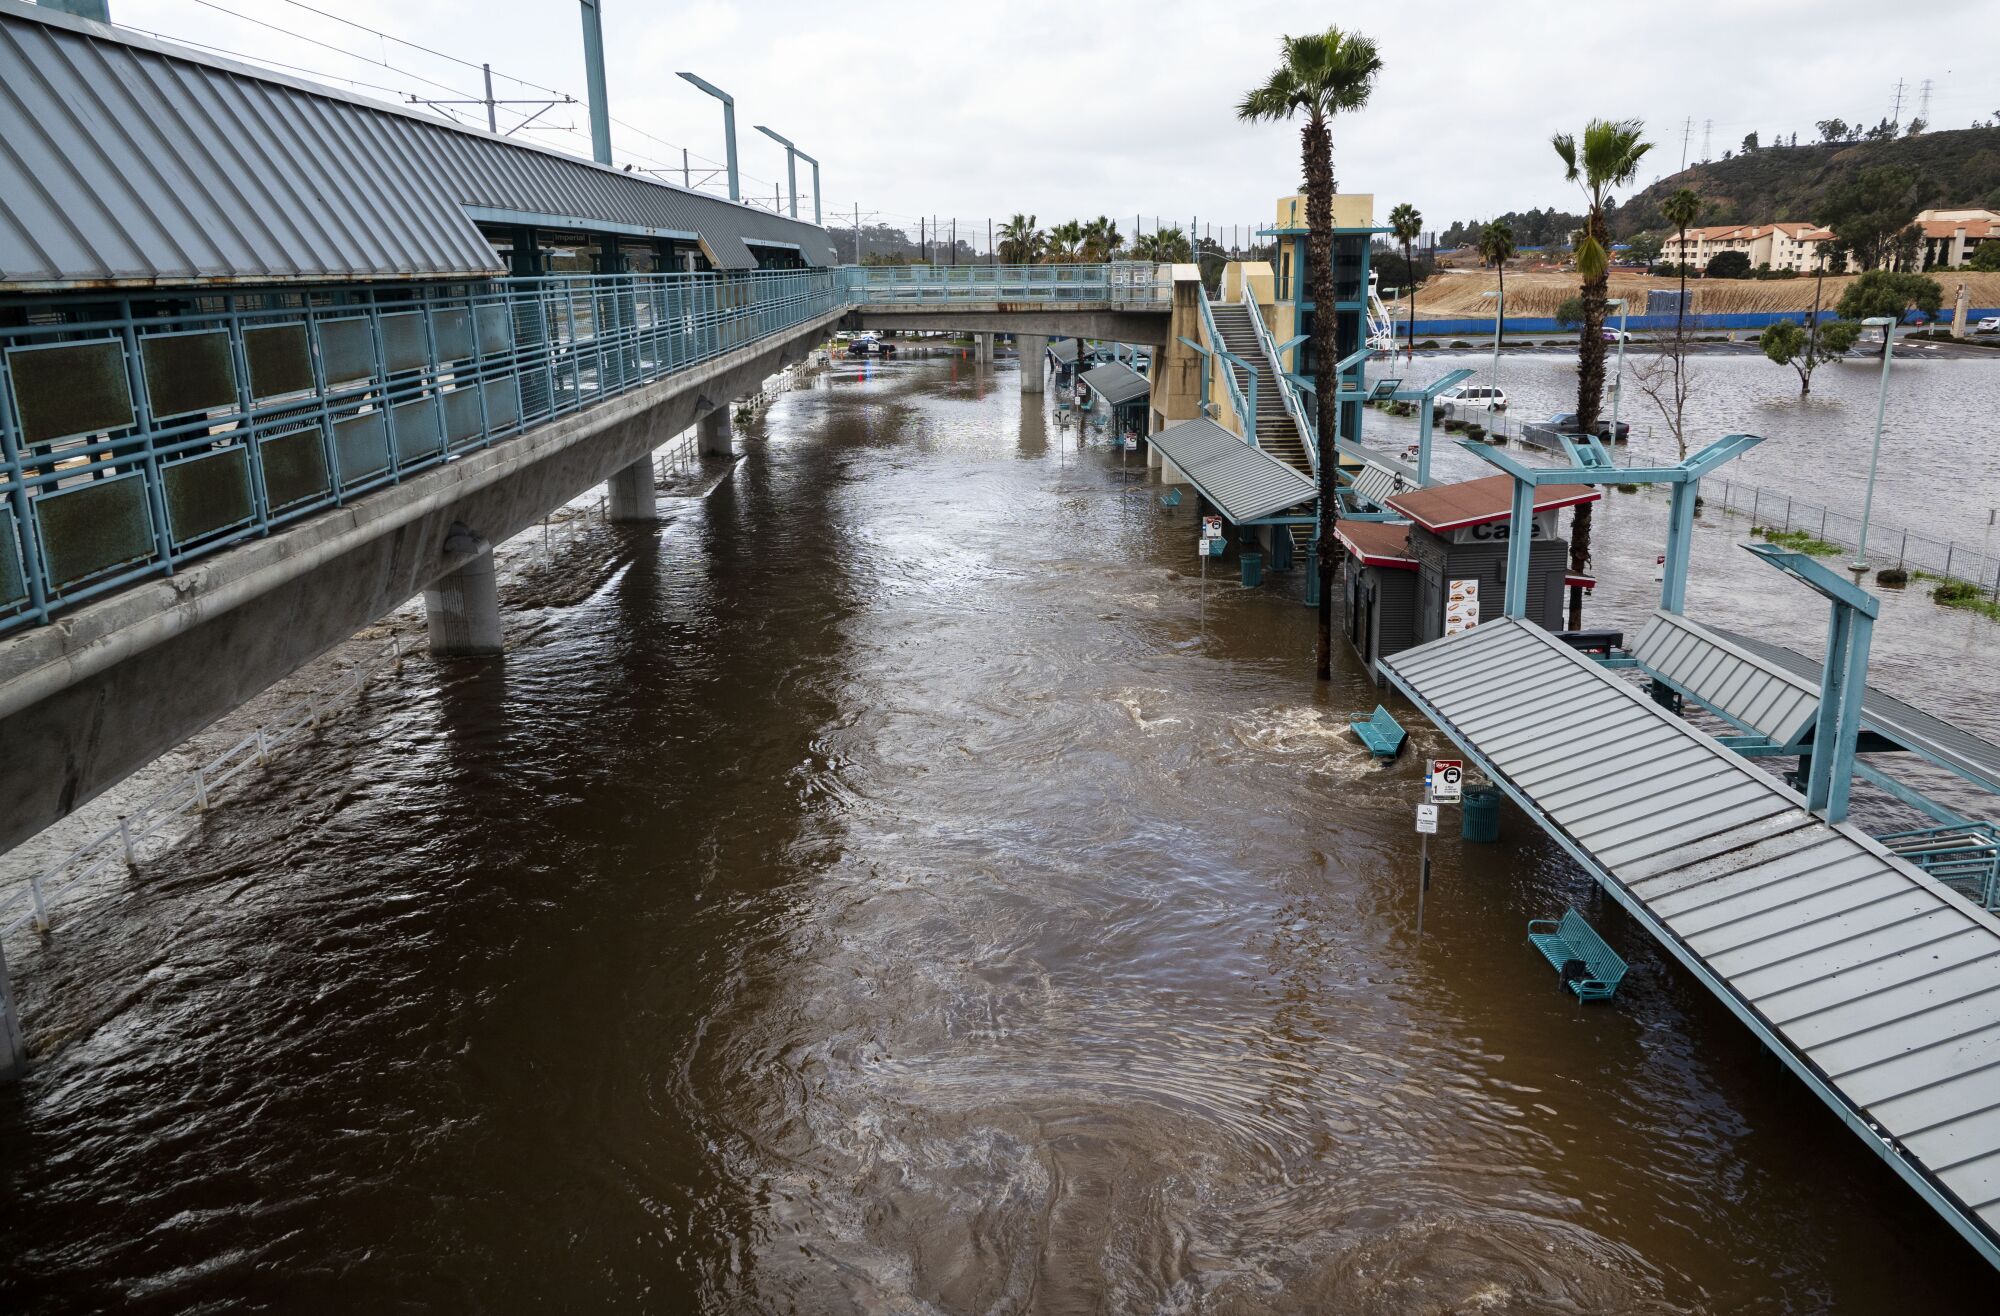 The Fashion Valley Transit Center was flooded near the swollen San Diego River in 